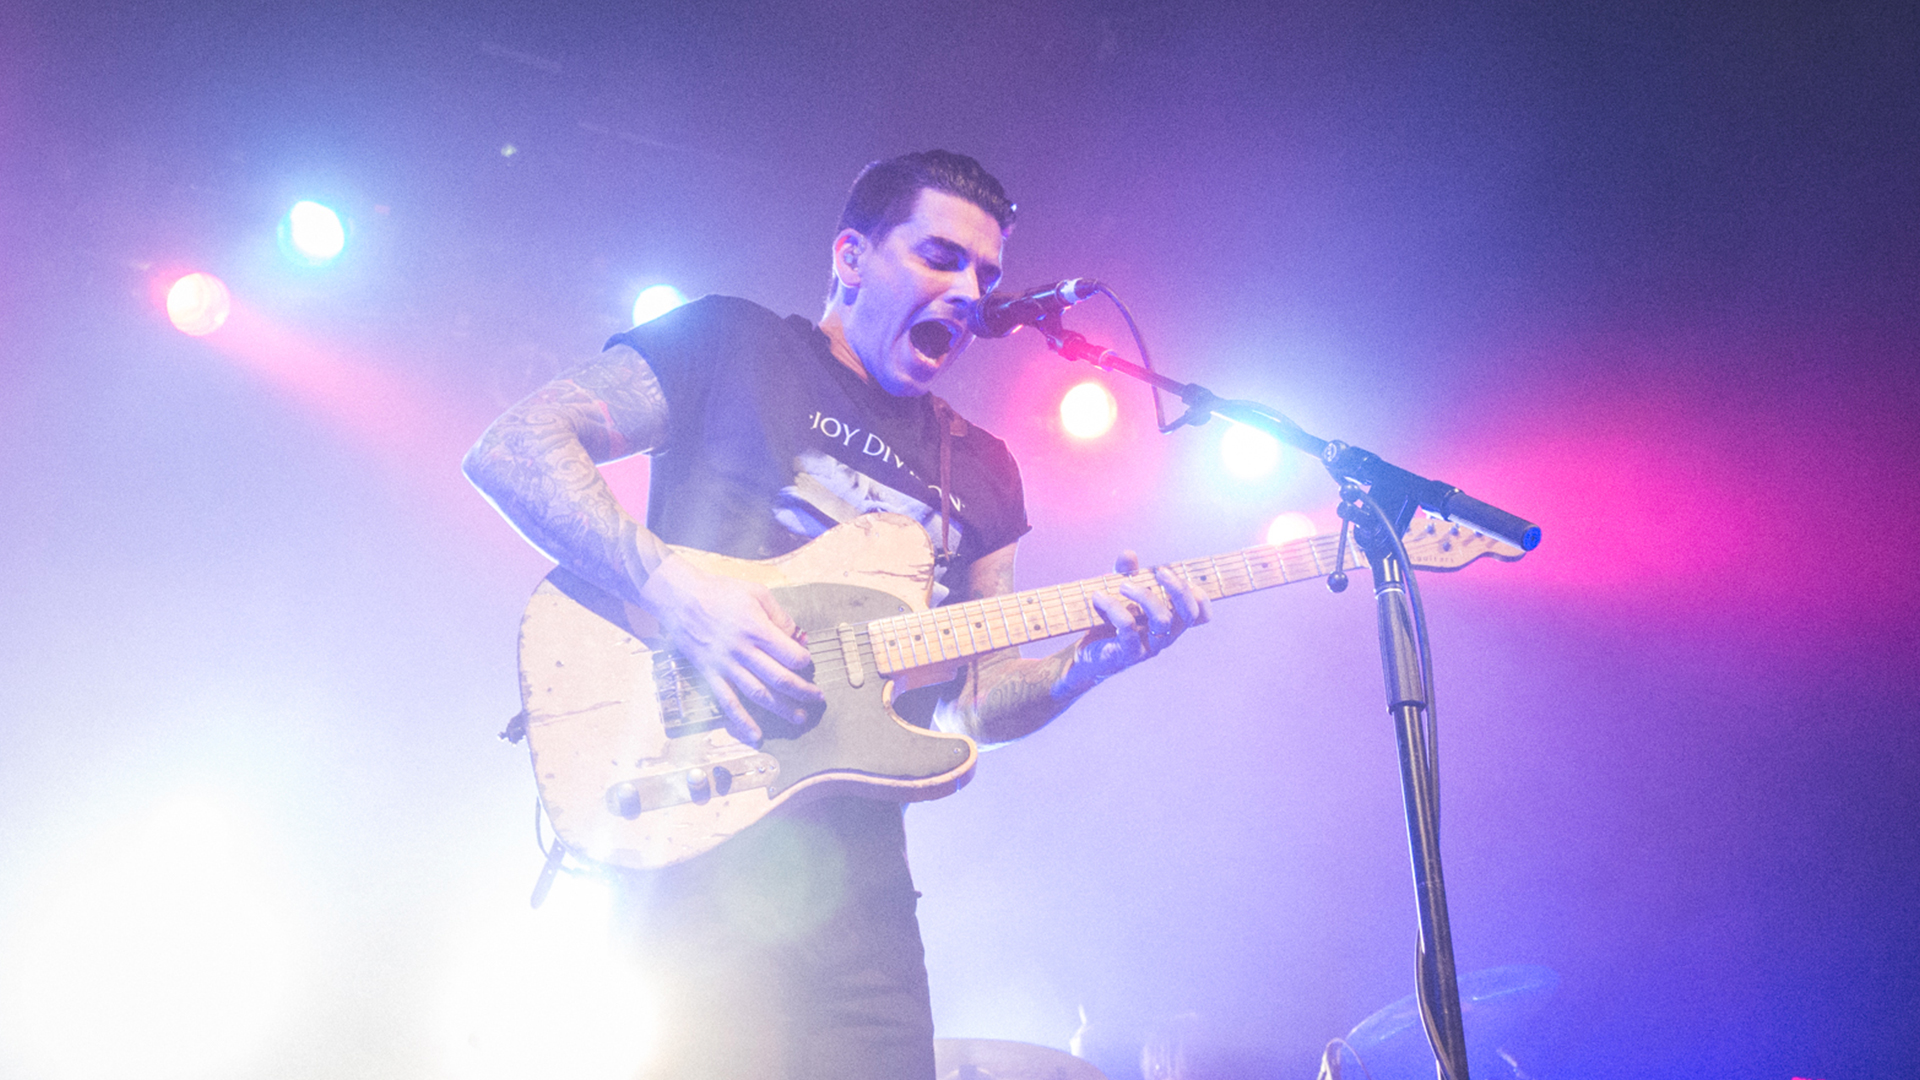 Gallery: Dashboard Confessional Plays Sold Out Show In Philly